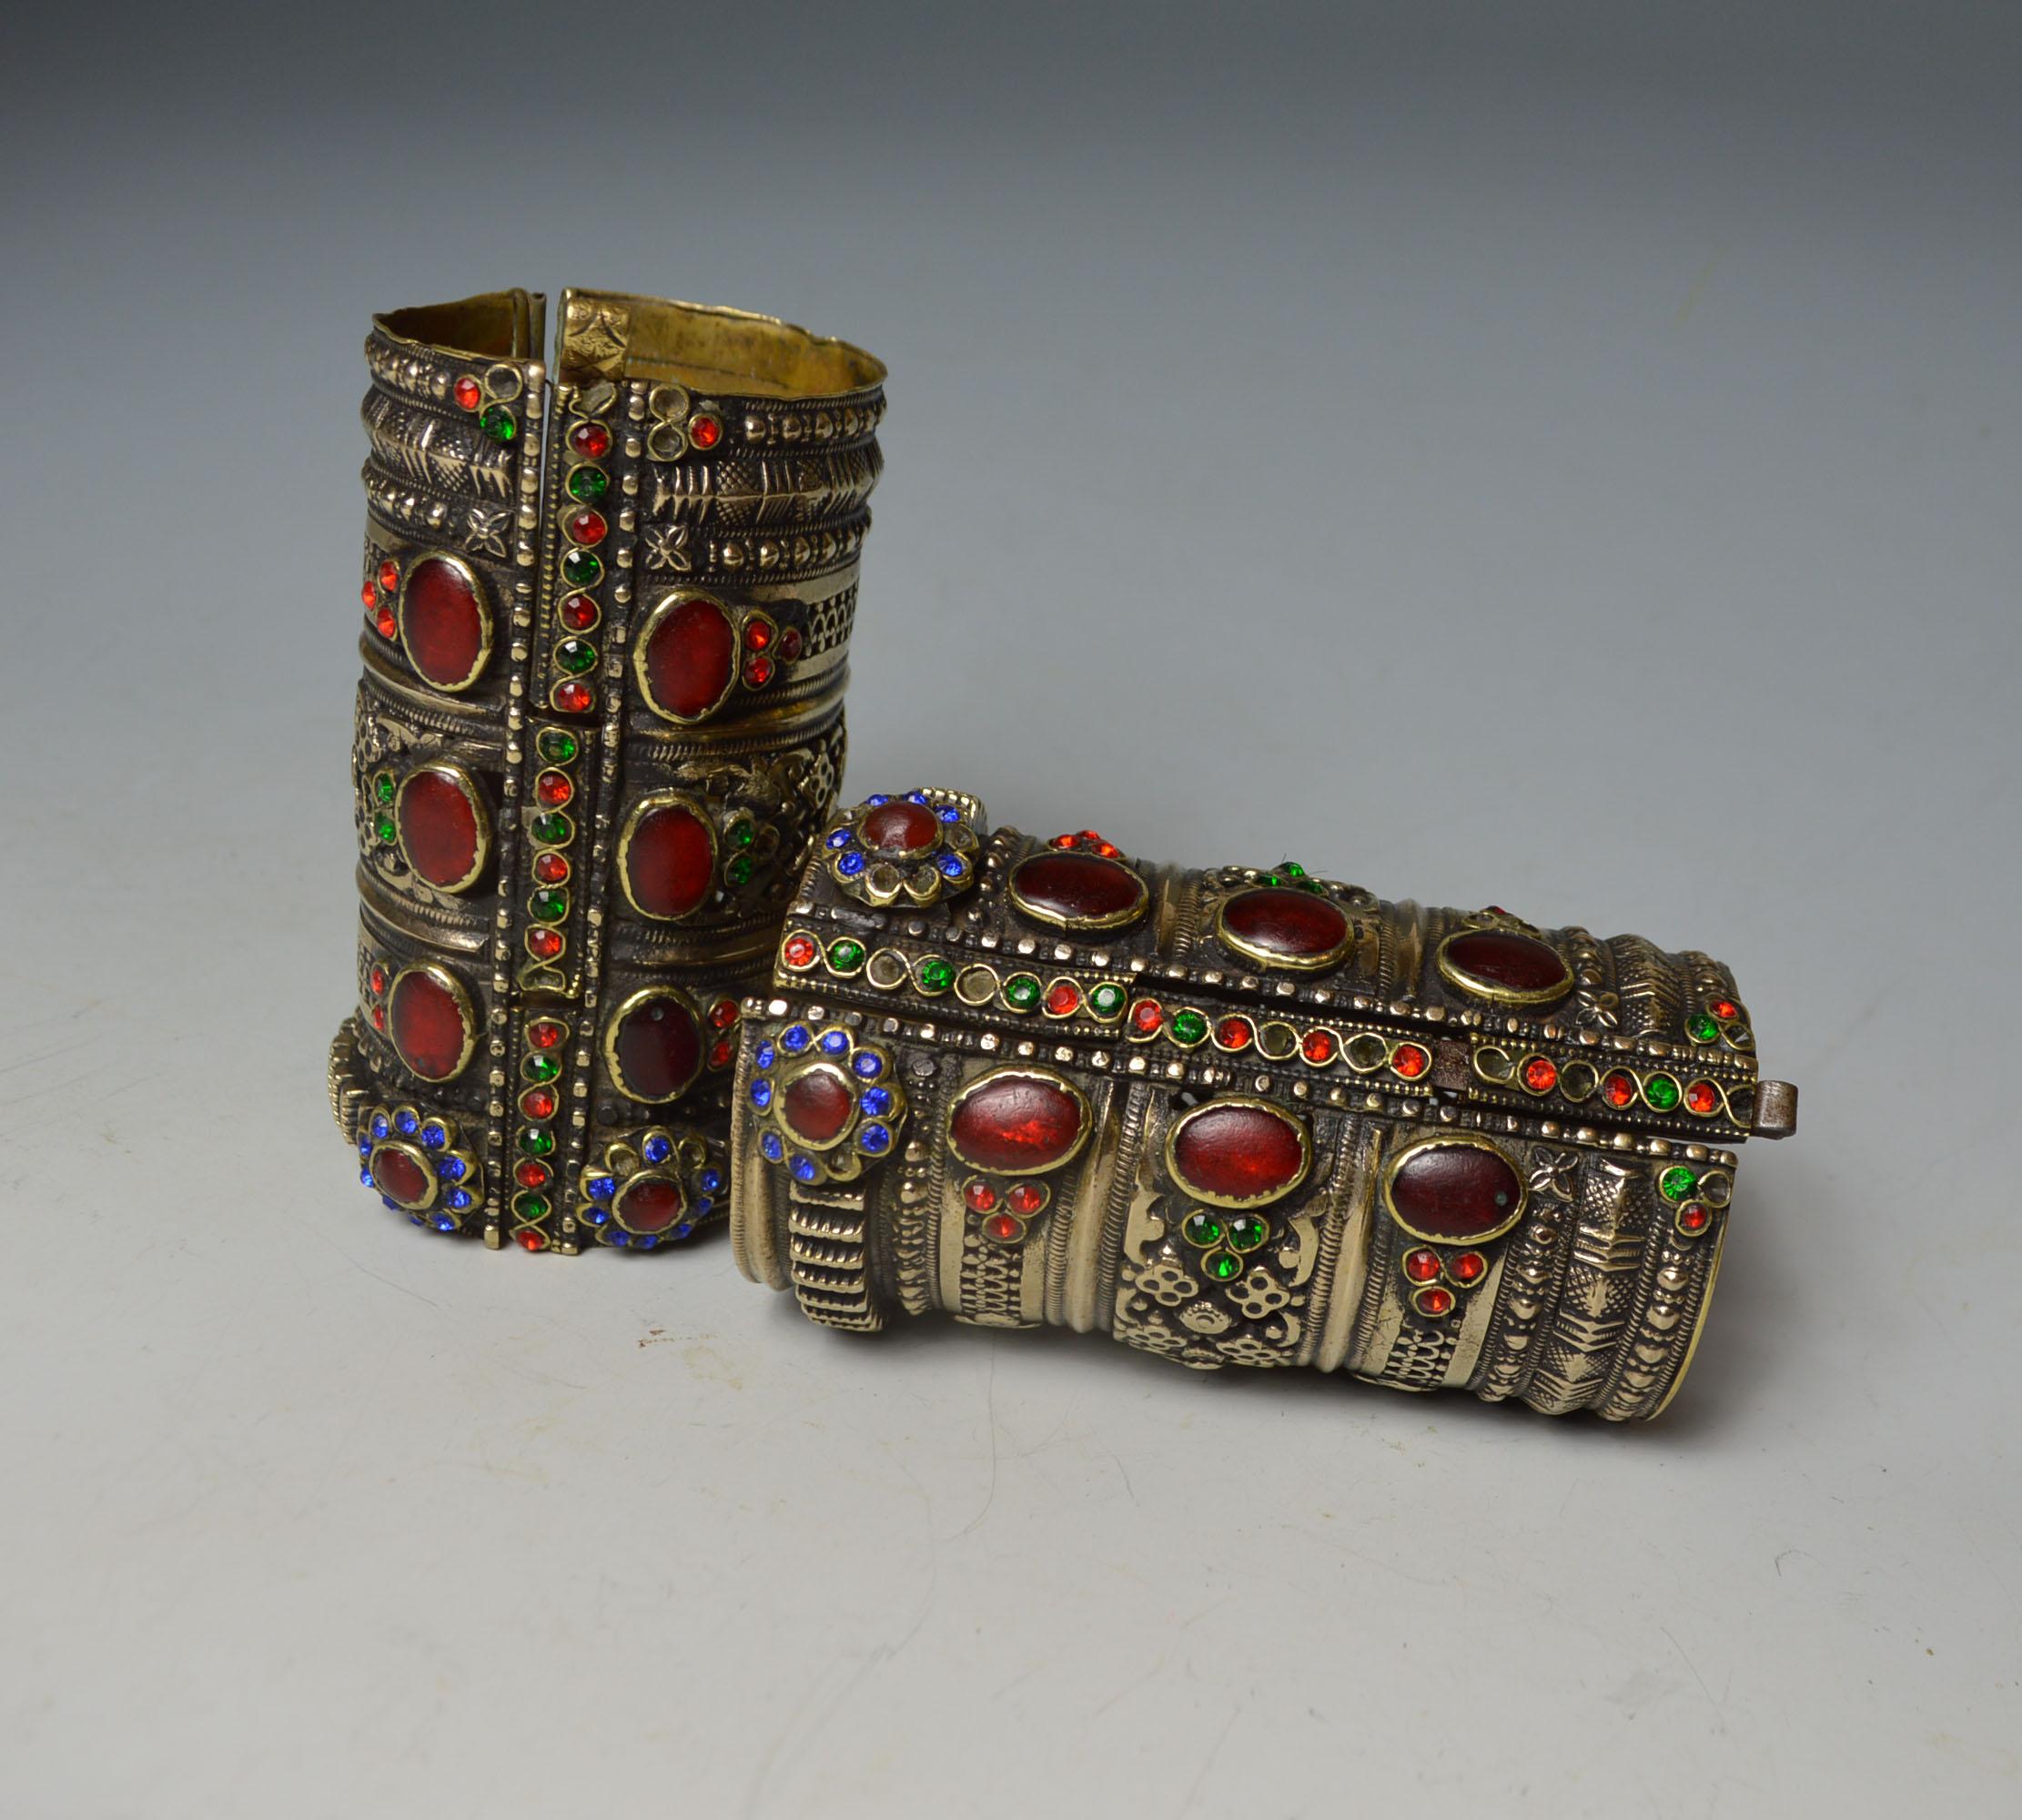 Fine pair antique tribal bracelets Himalaya Afghanistan
A high quality pair of Tribal marriage bracelets from the tribal regions of Afghanistan
Brass interior with silver alloy overlay and glass stones
nice pieces for decorative purposes or